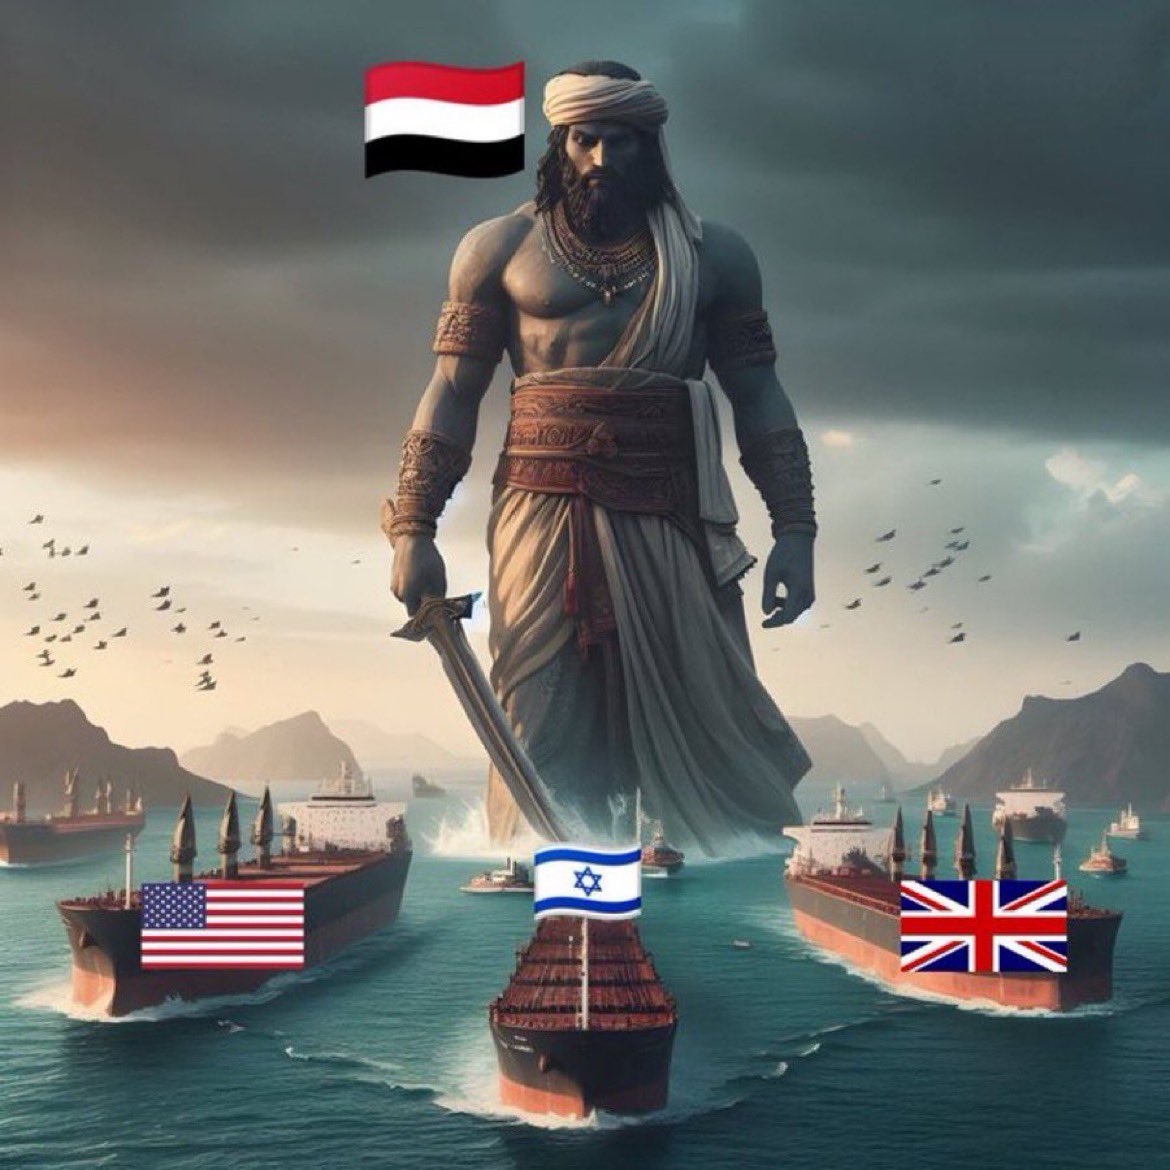 Al-Houthi is considering the option of closing the Red Sea if the warships of the American-led coalition protecting Israeli ships refuse to leave the Red Sea

#Houthis #Red_Sea #yemen #America #European_Union #Gaza_War #Palestine #israil 
#wintervolliefde #paobc #WIGMUN #gaming